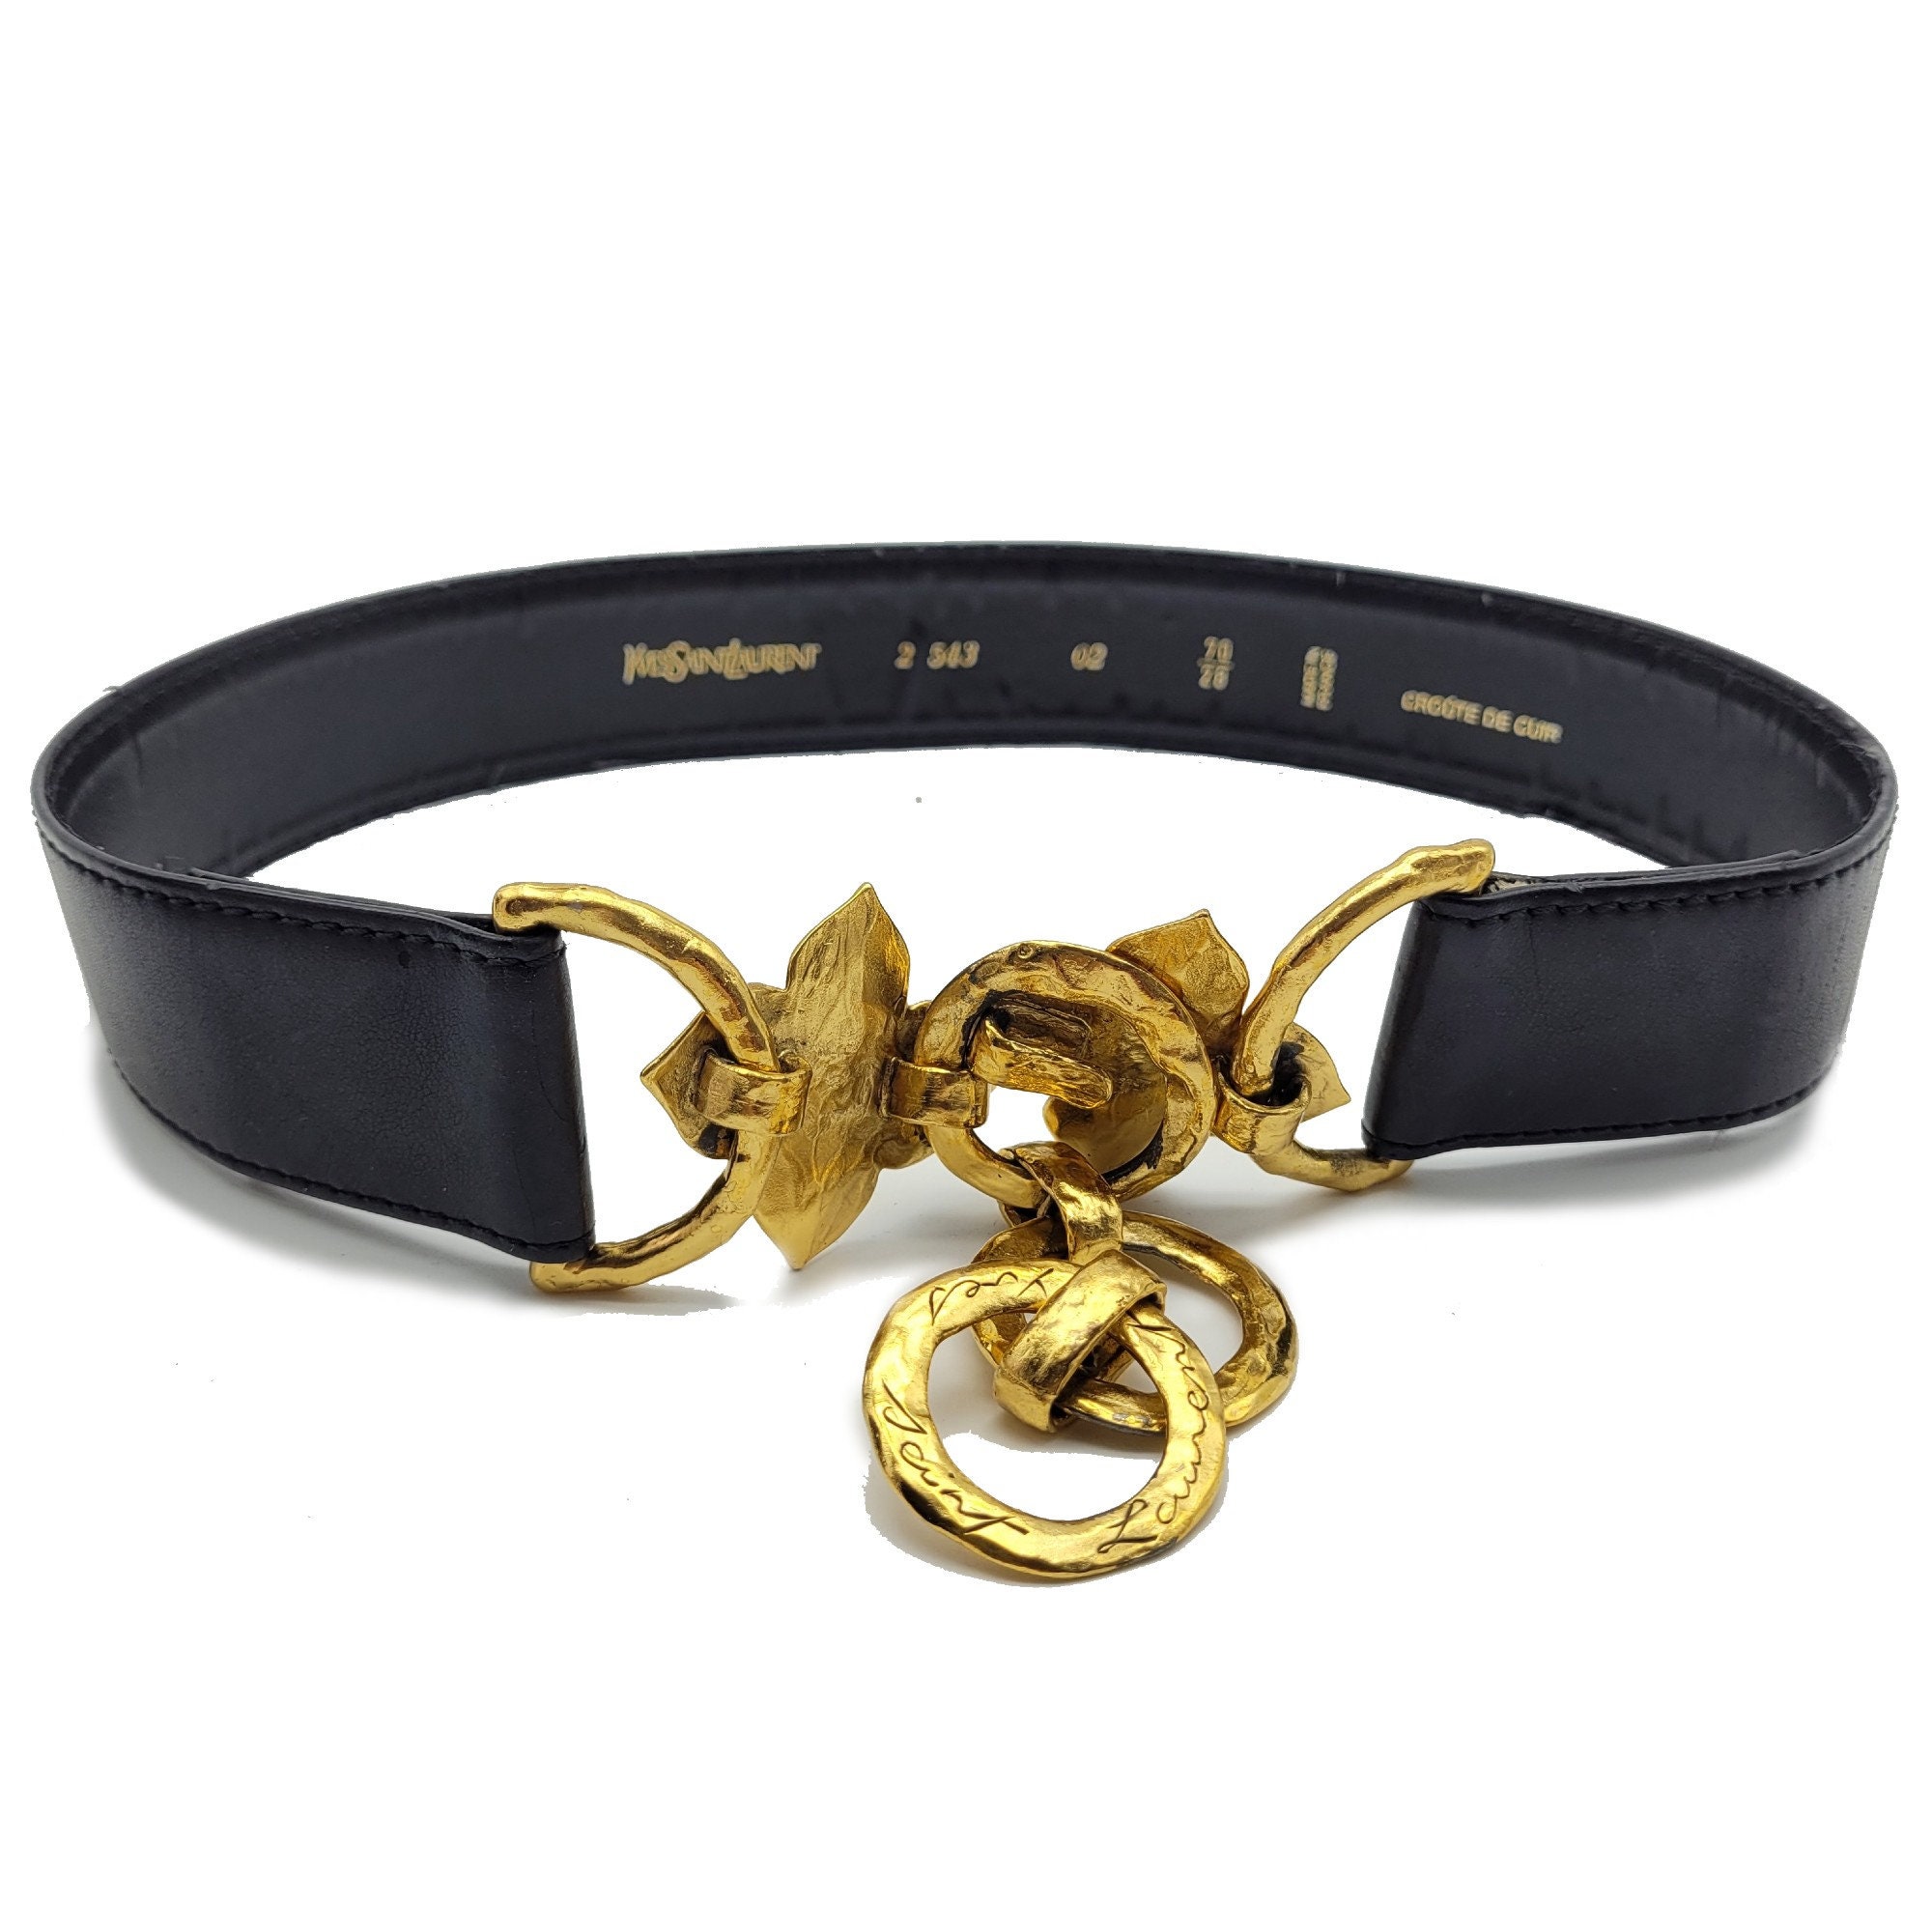 Sold at Auction: A Mickey Mouse belt buckle, & a YSL belt buckle